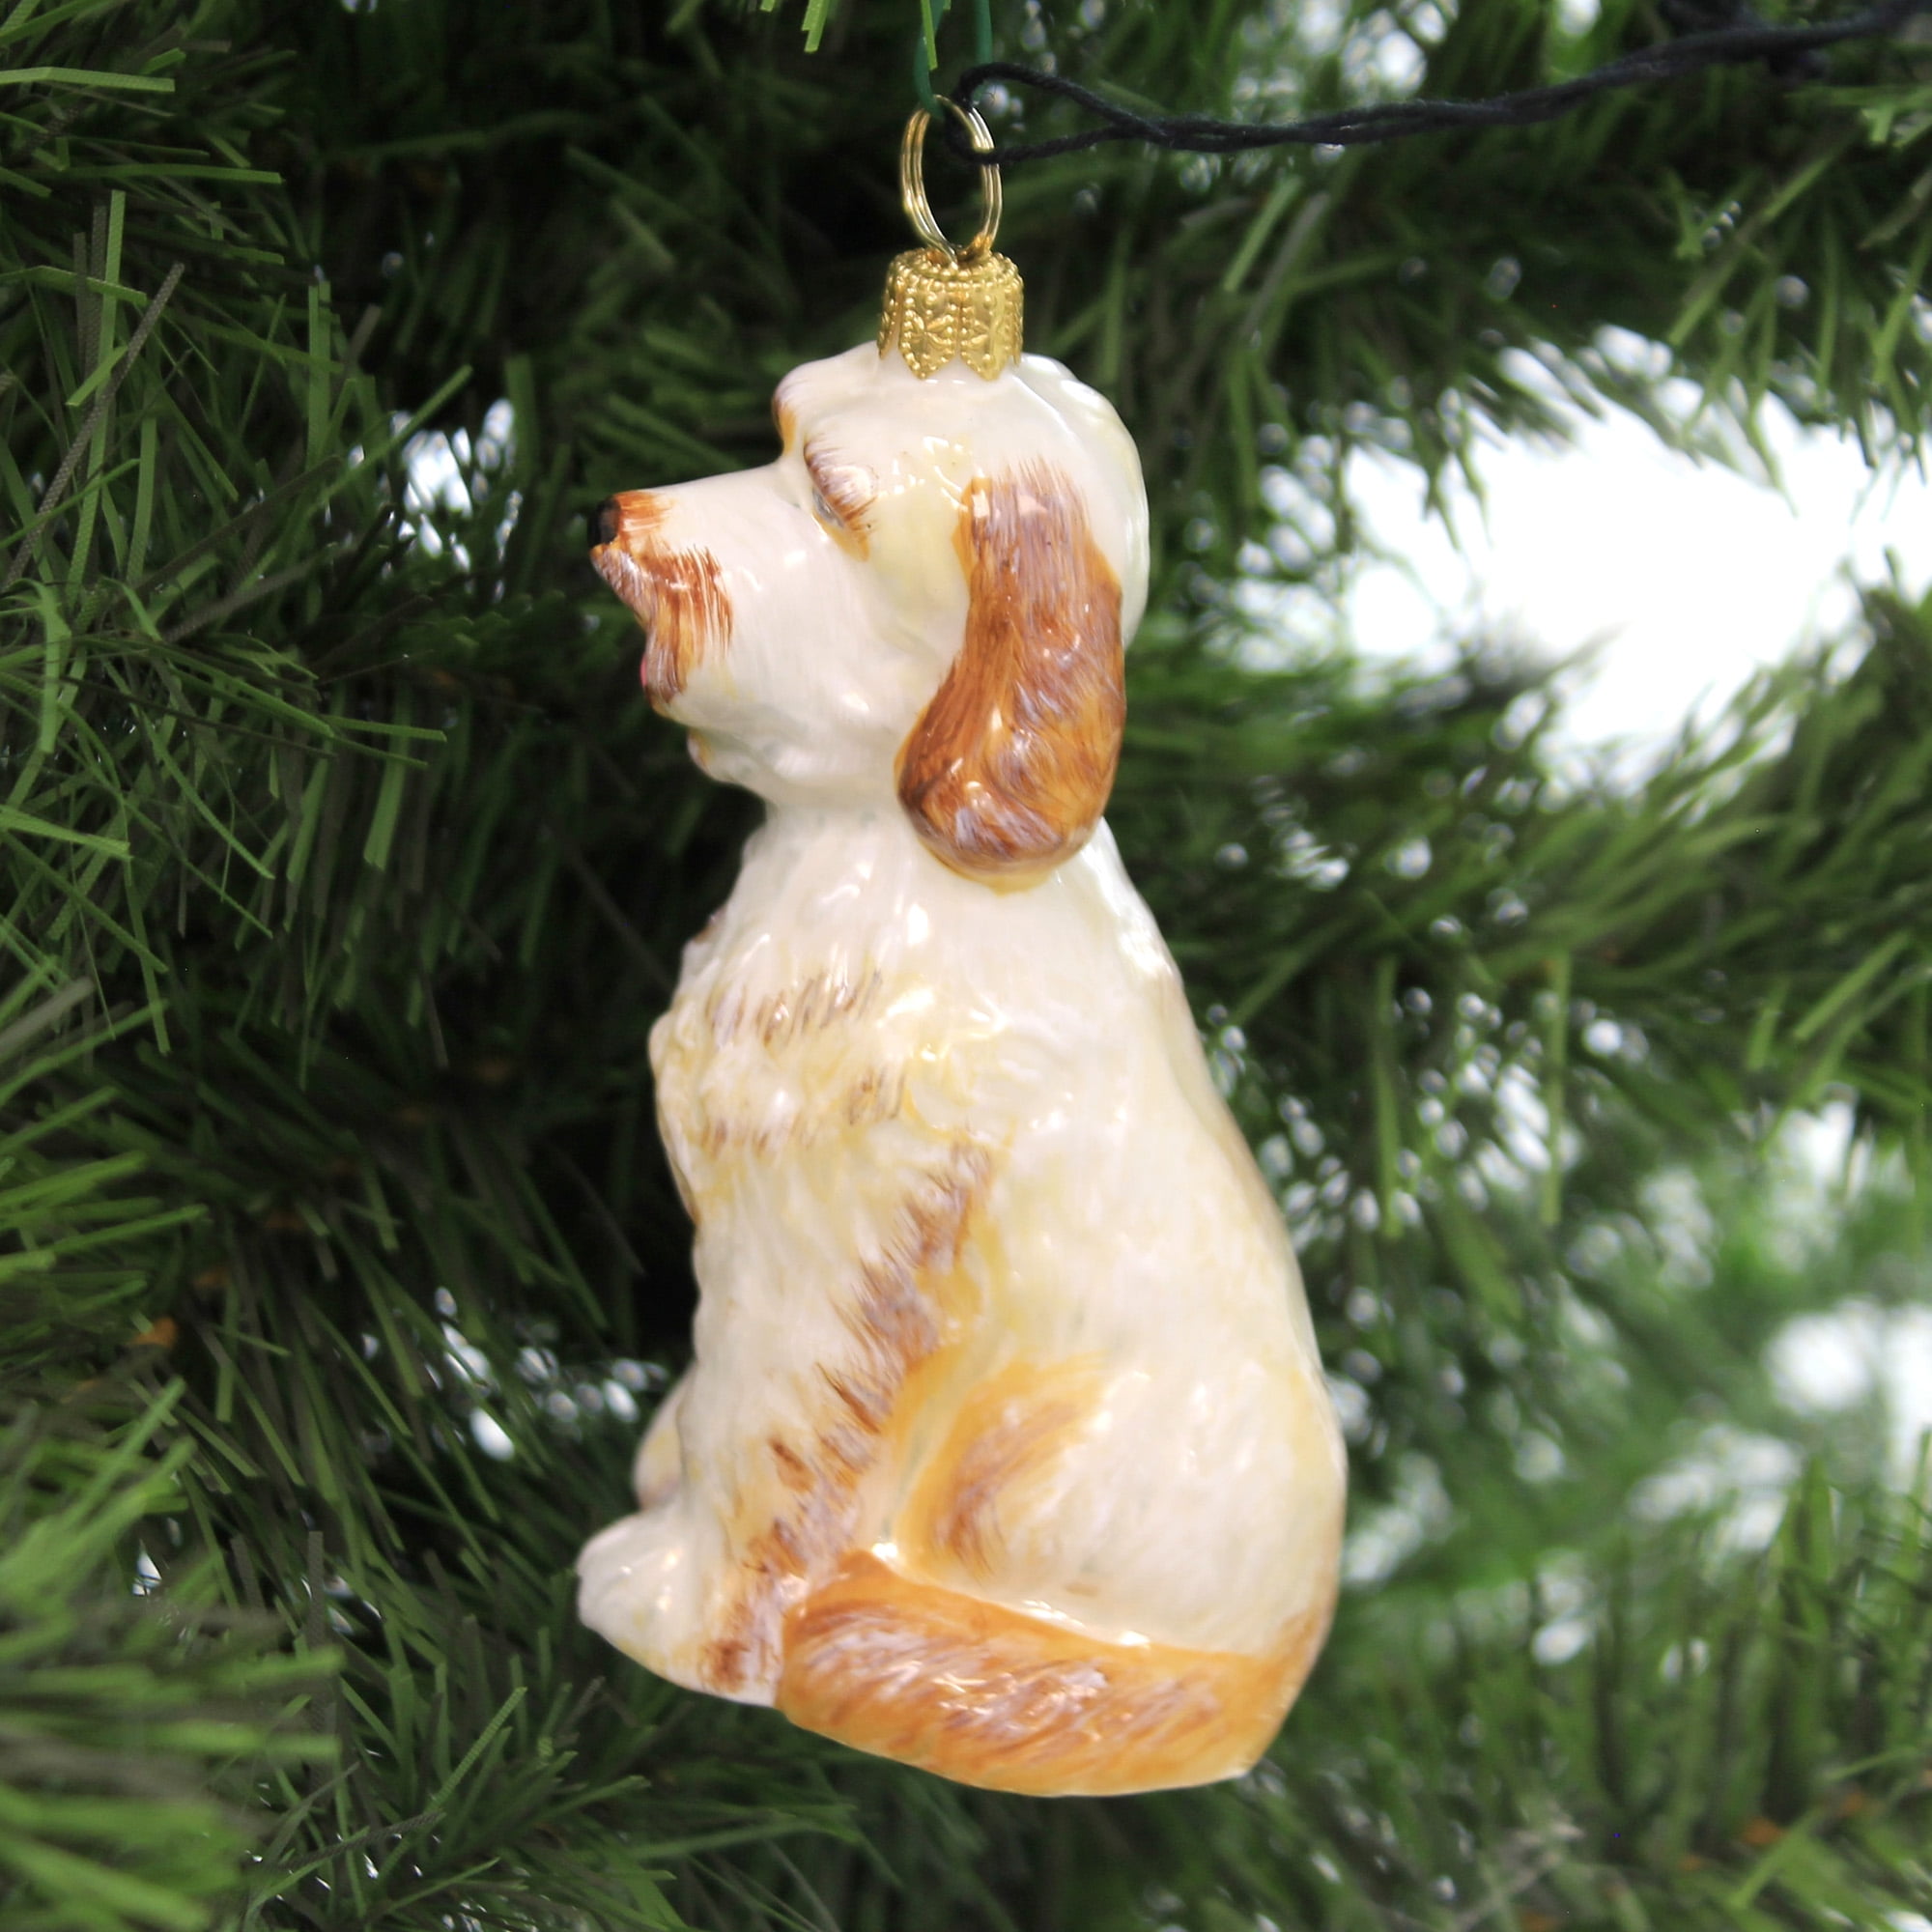 GOLDEN DOODLE Dog Polish Blown Glass Christmas Ornament Decoration From Poland 